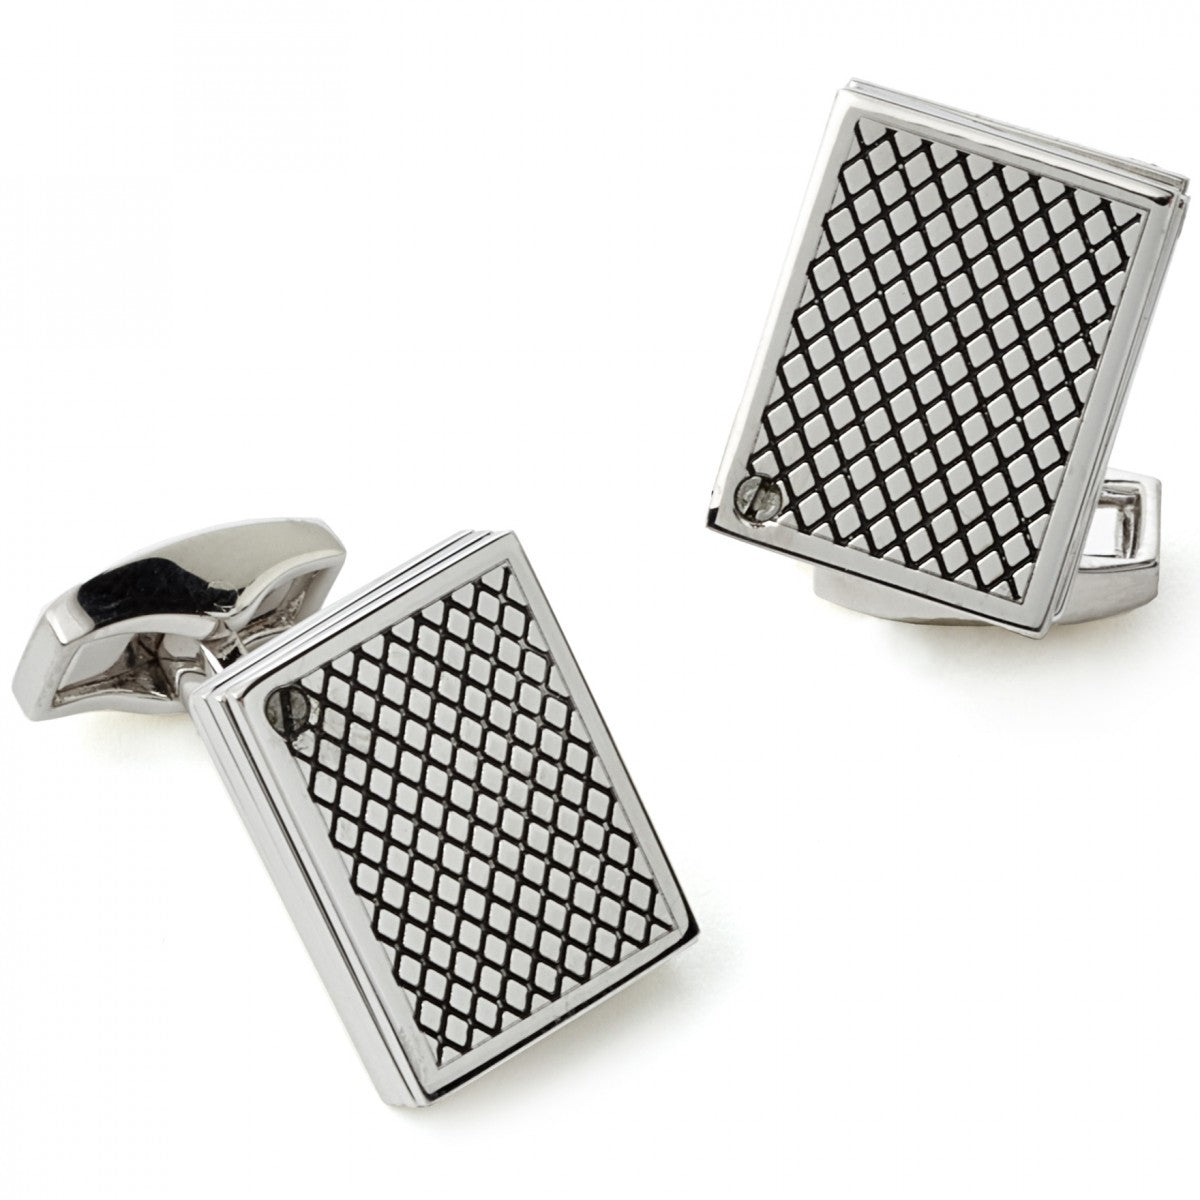 Tateossian Playing Cards Cufflinks, King, Queen, Jack and Aces